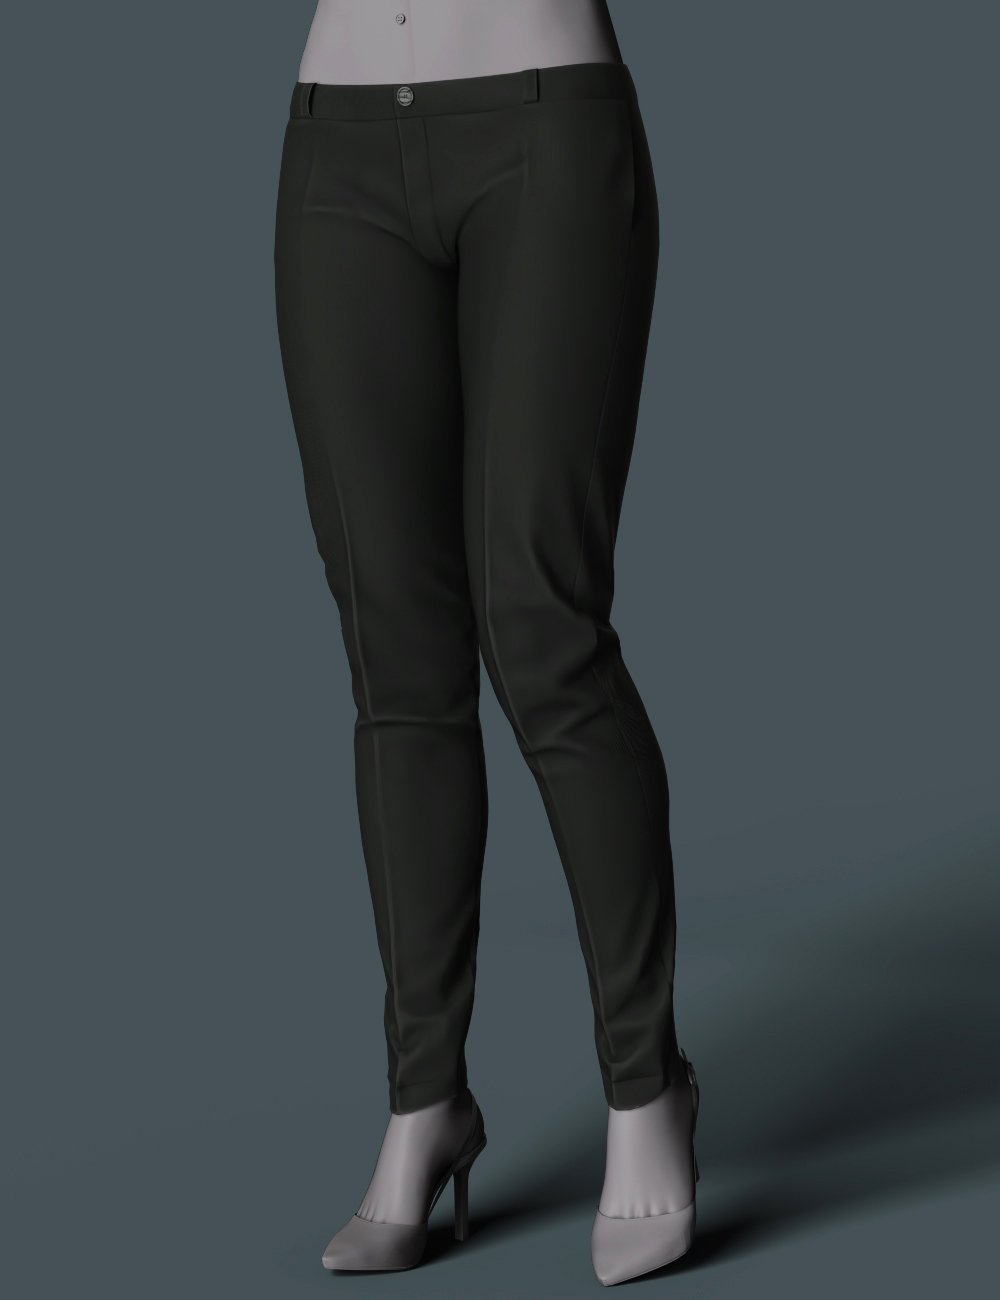 MDU dForce Trousers for Genesis 8 and 8.1 Females by: chungdan, 3D Models by Daz 3D